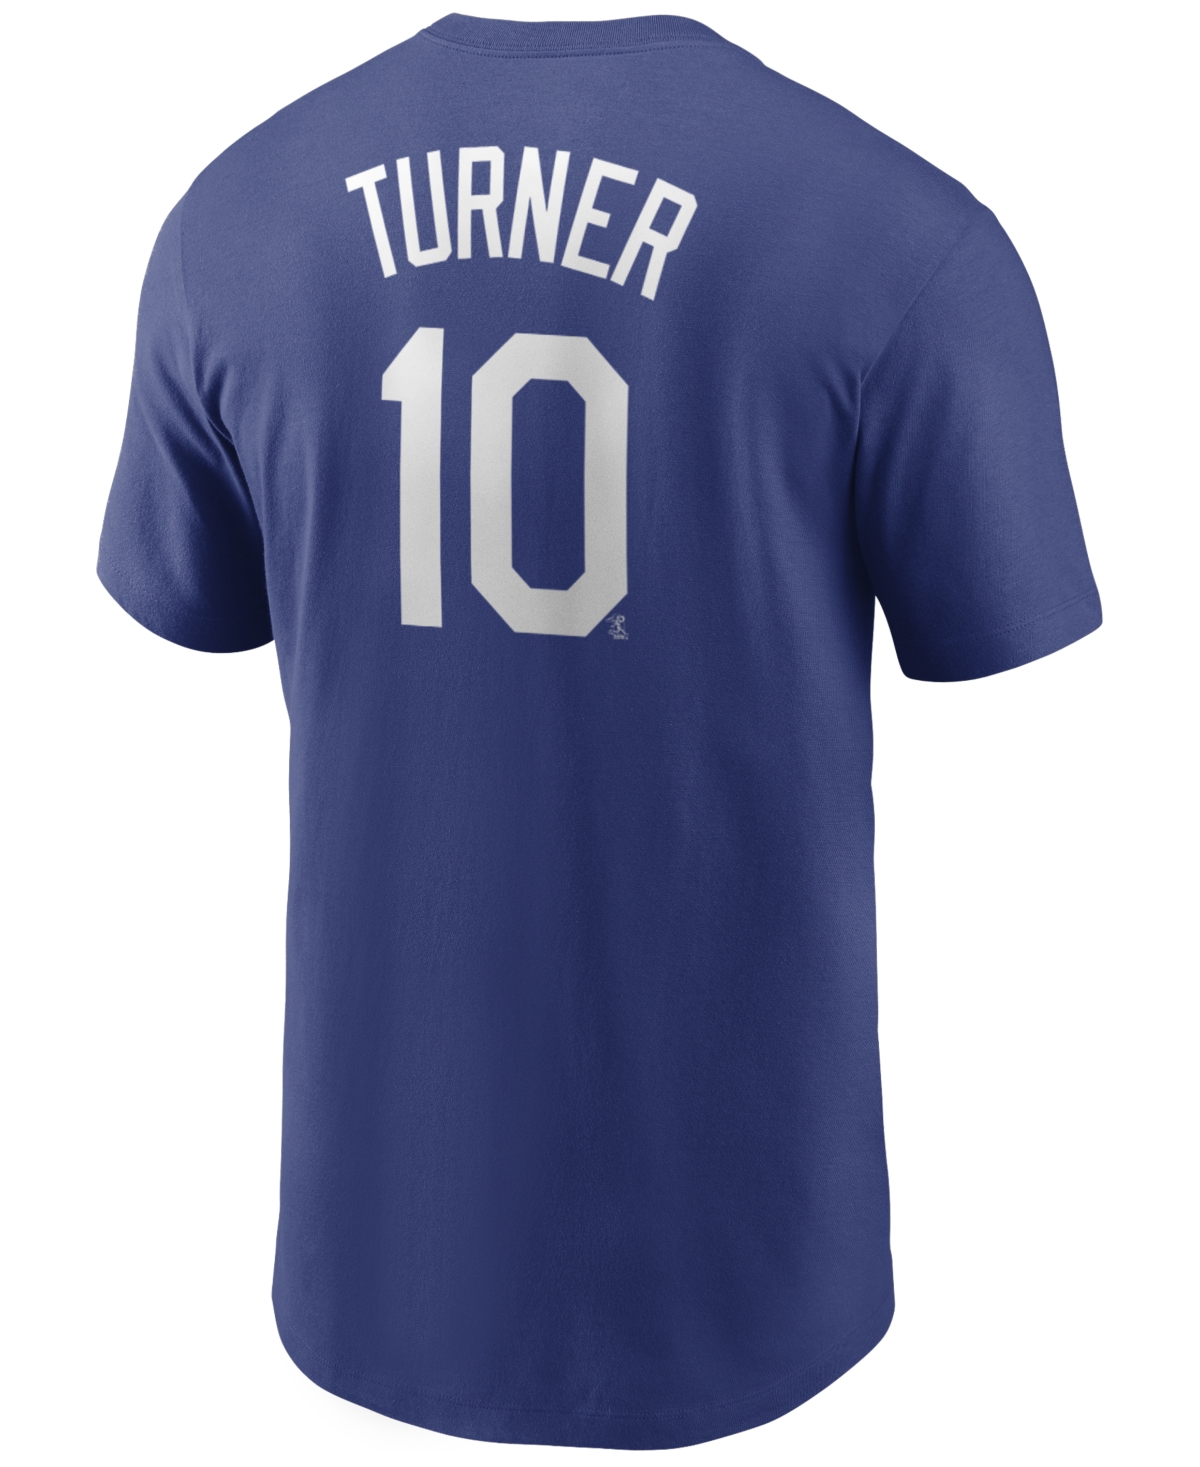 Nike Men's Justin Turner Los Angeles Dodgers Name and Number Player T-Shirt